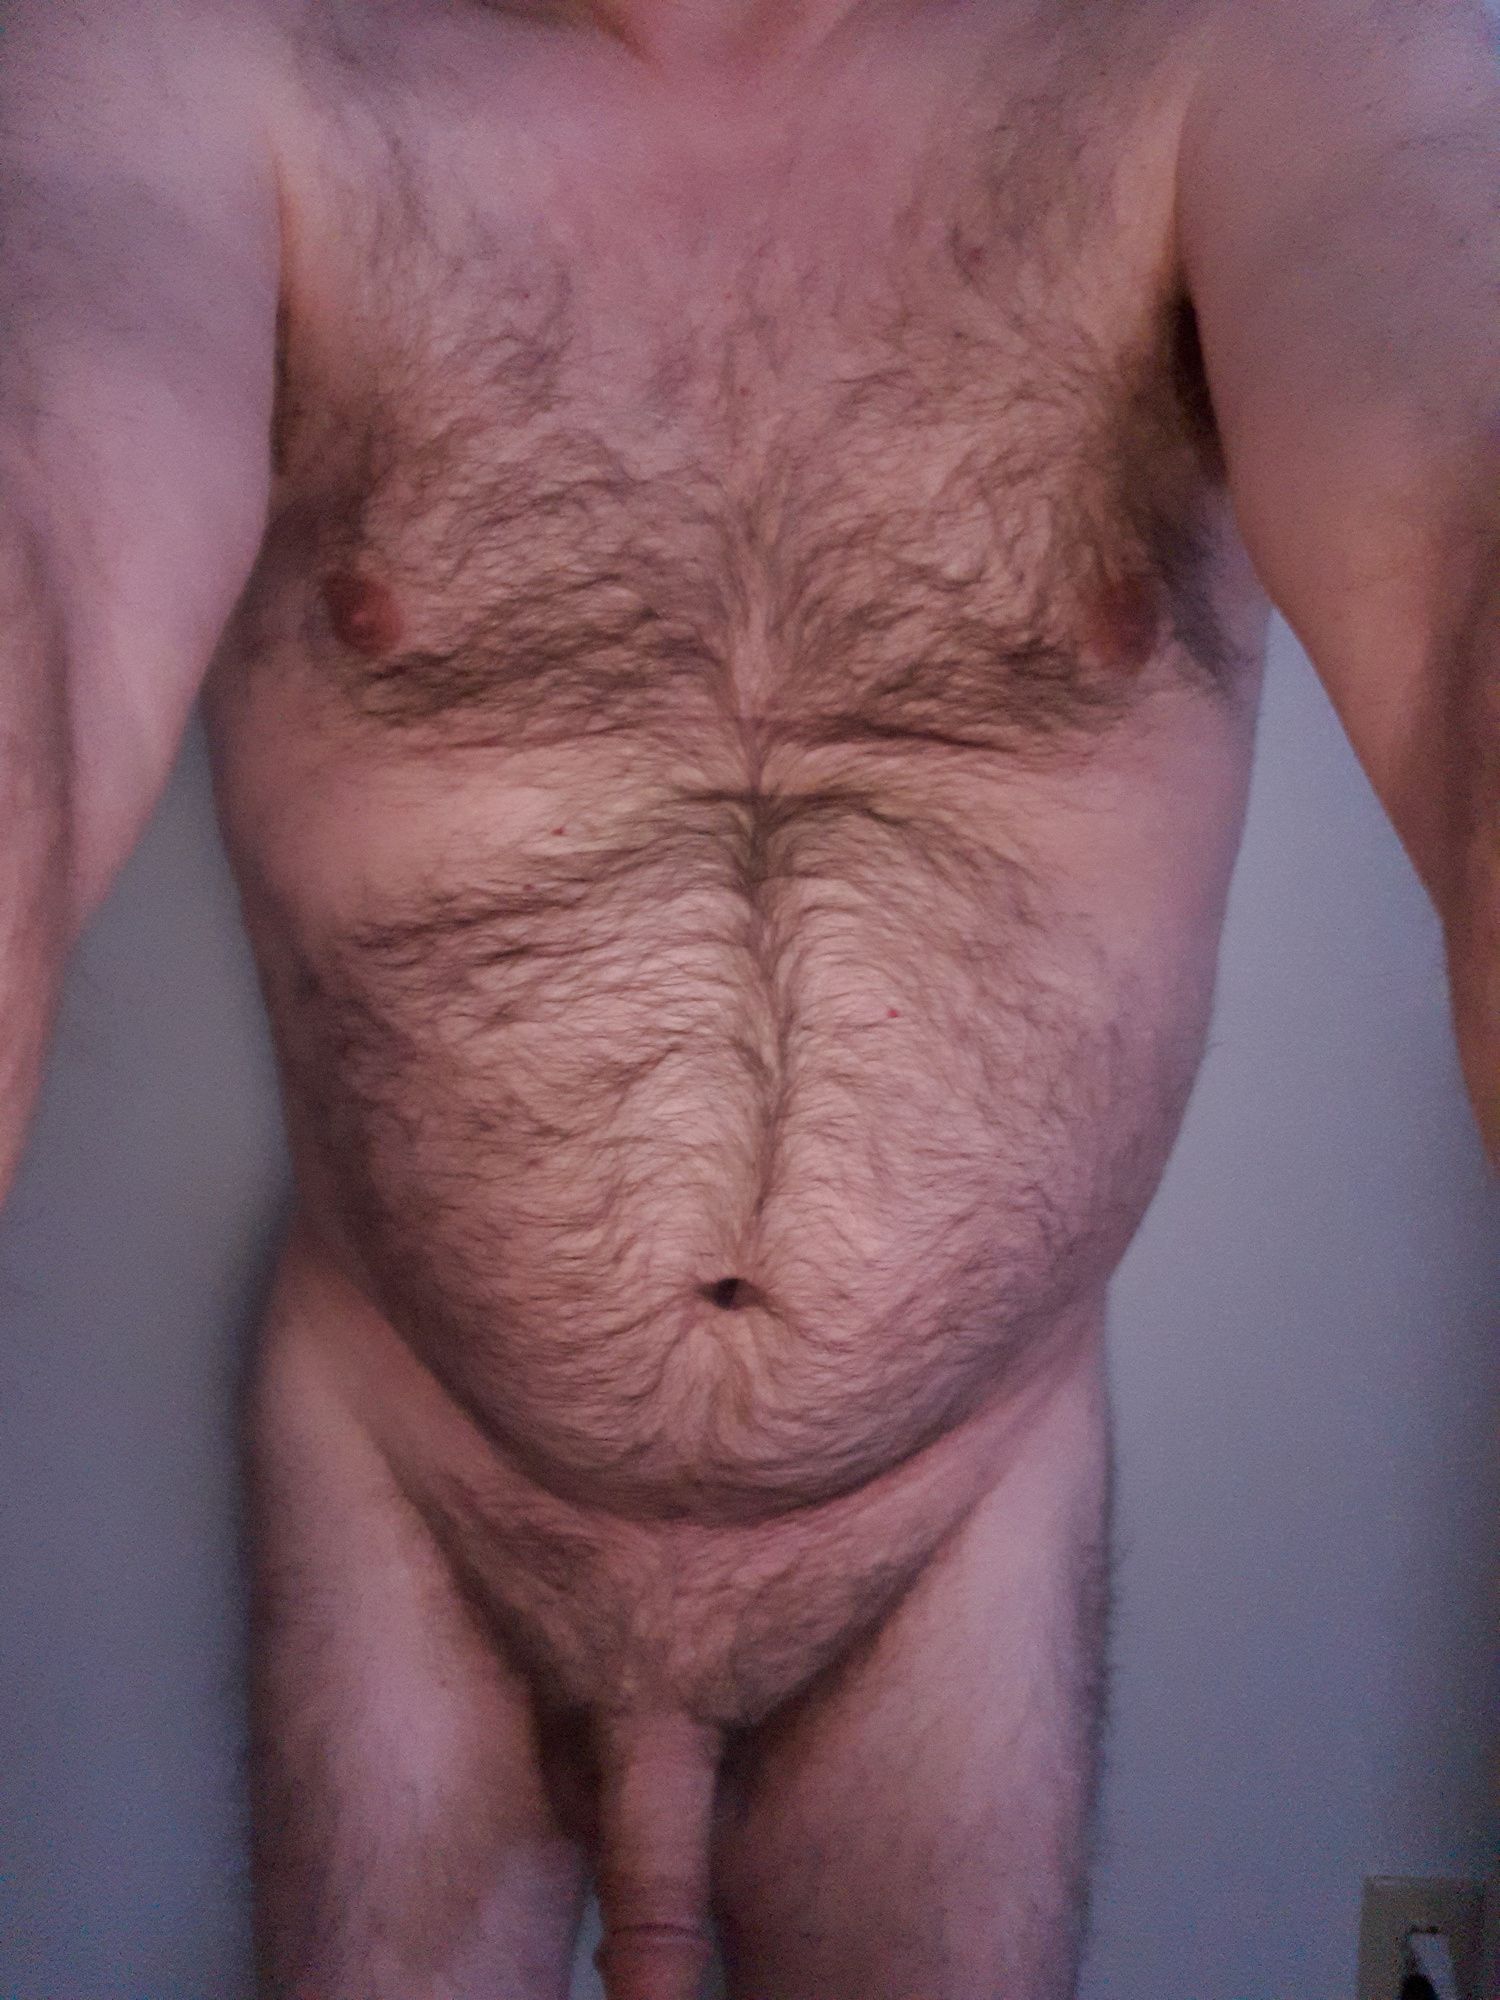 My hairy dad bod #3